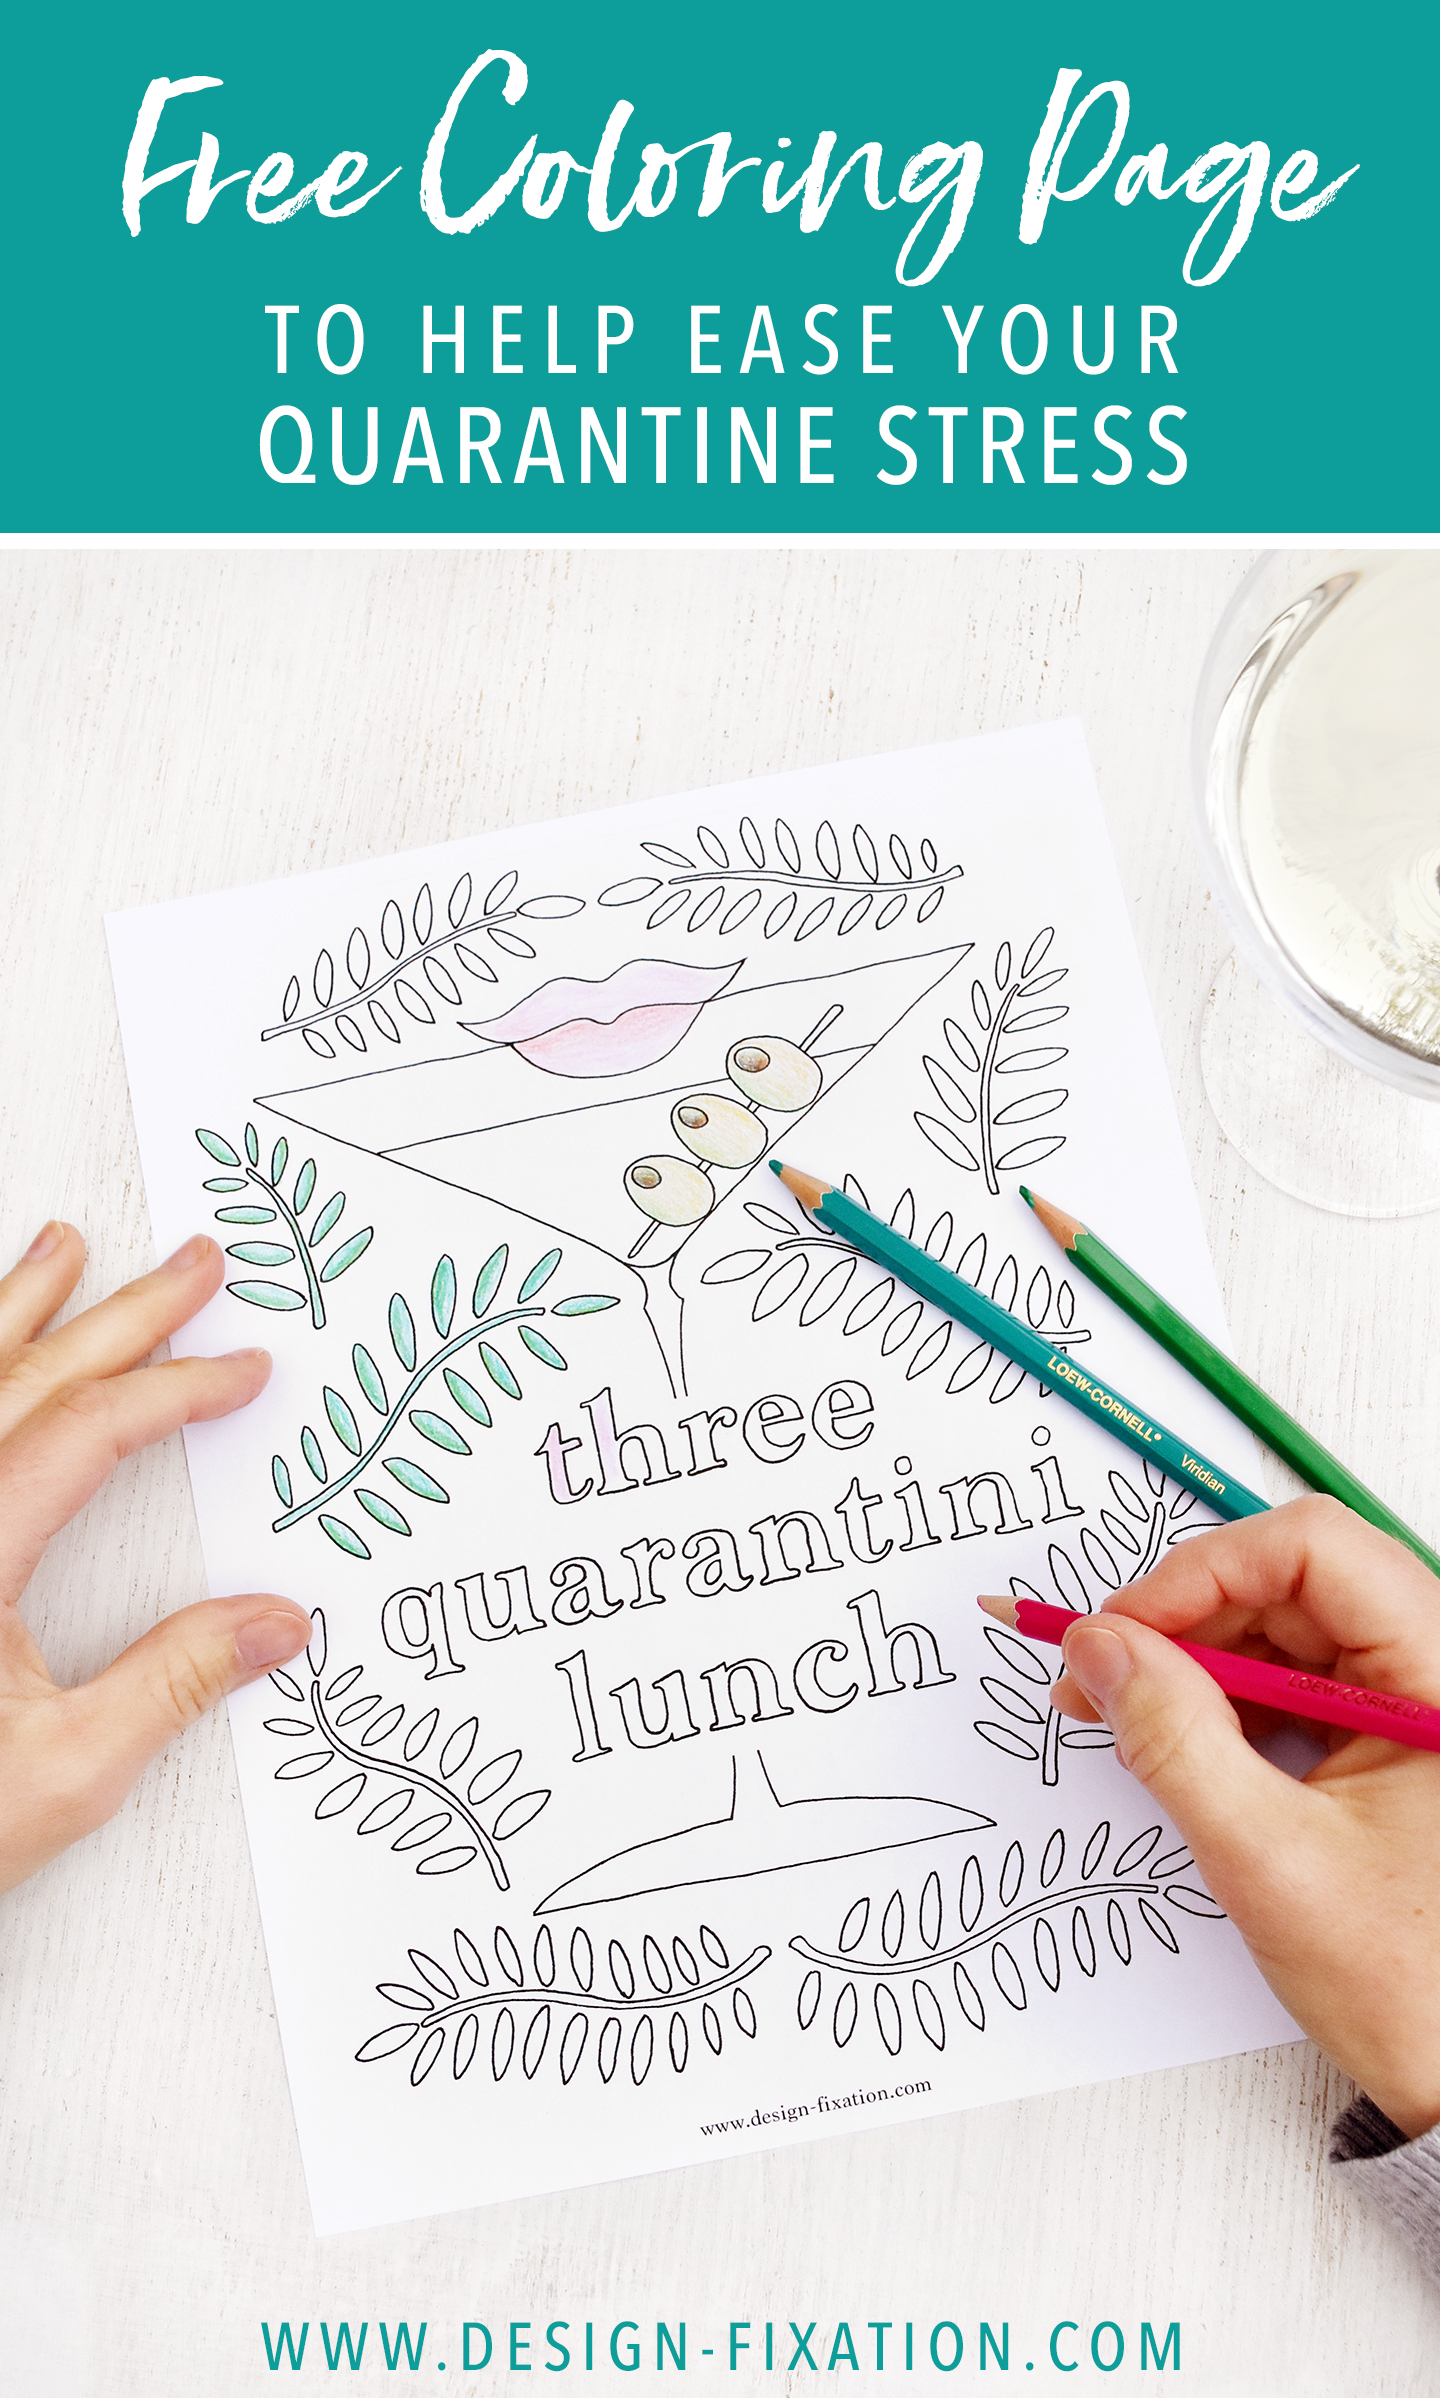 Free Coloring Page... Ease Your Quarantine Stress! /// By Design Fixation #free #coloring #quarantine #stress_relief 